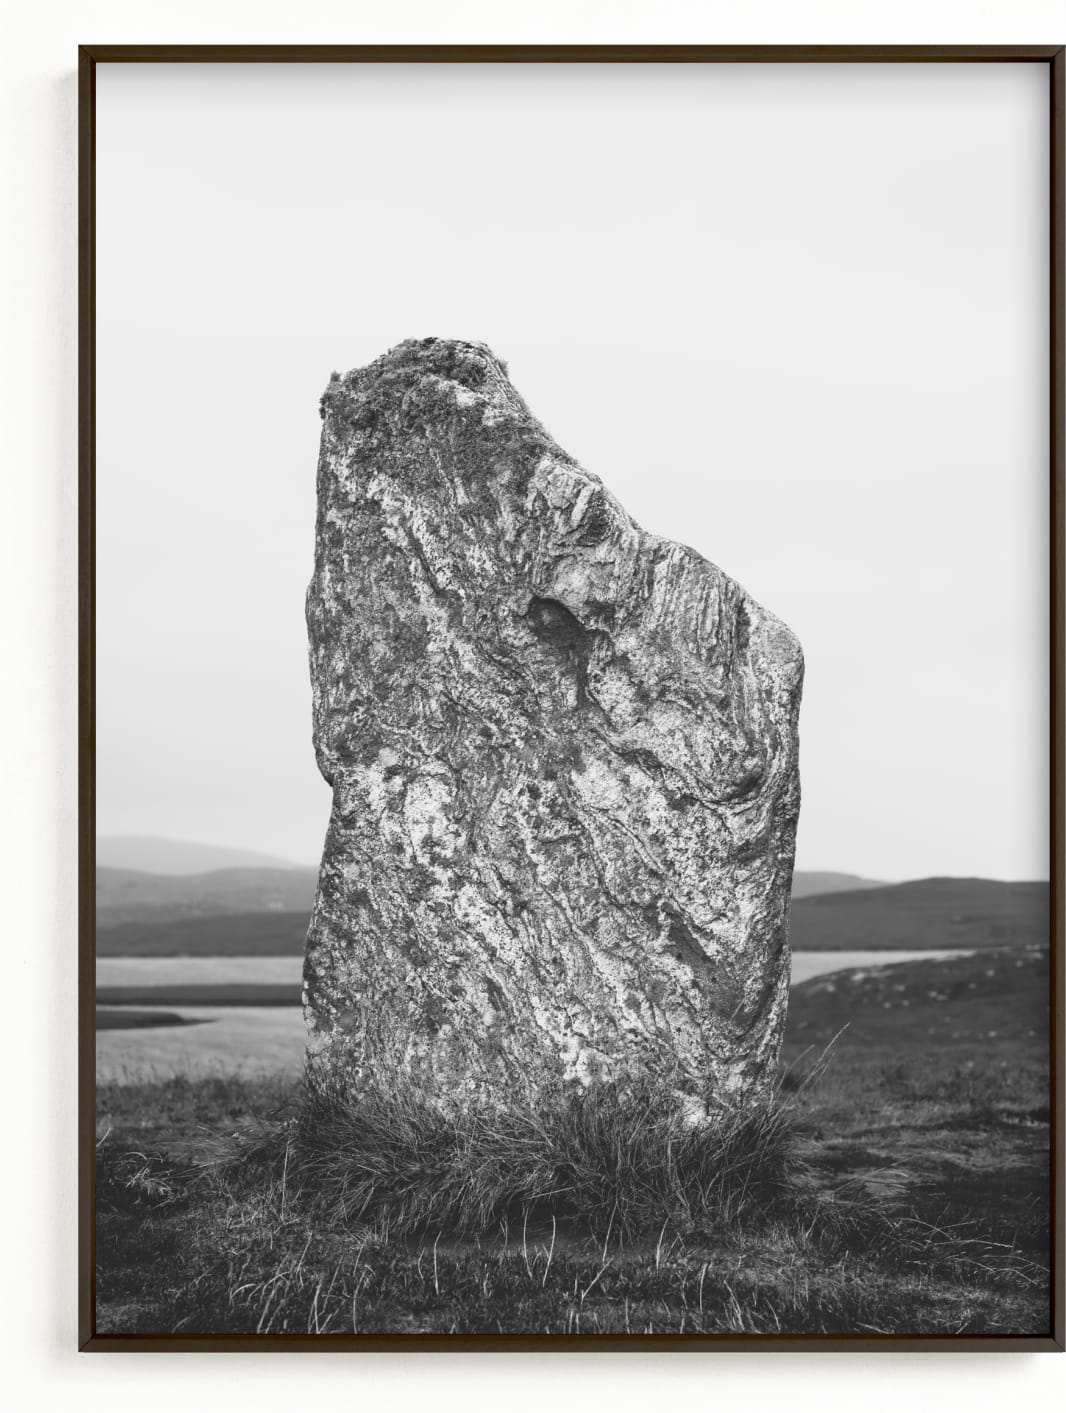 This is a black and white art by Kamala Nahas called Standing Stones IV.